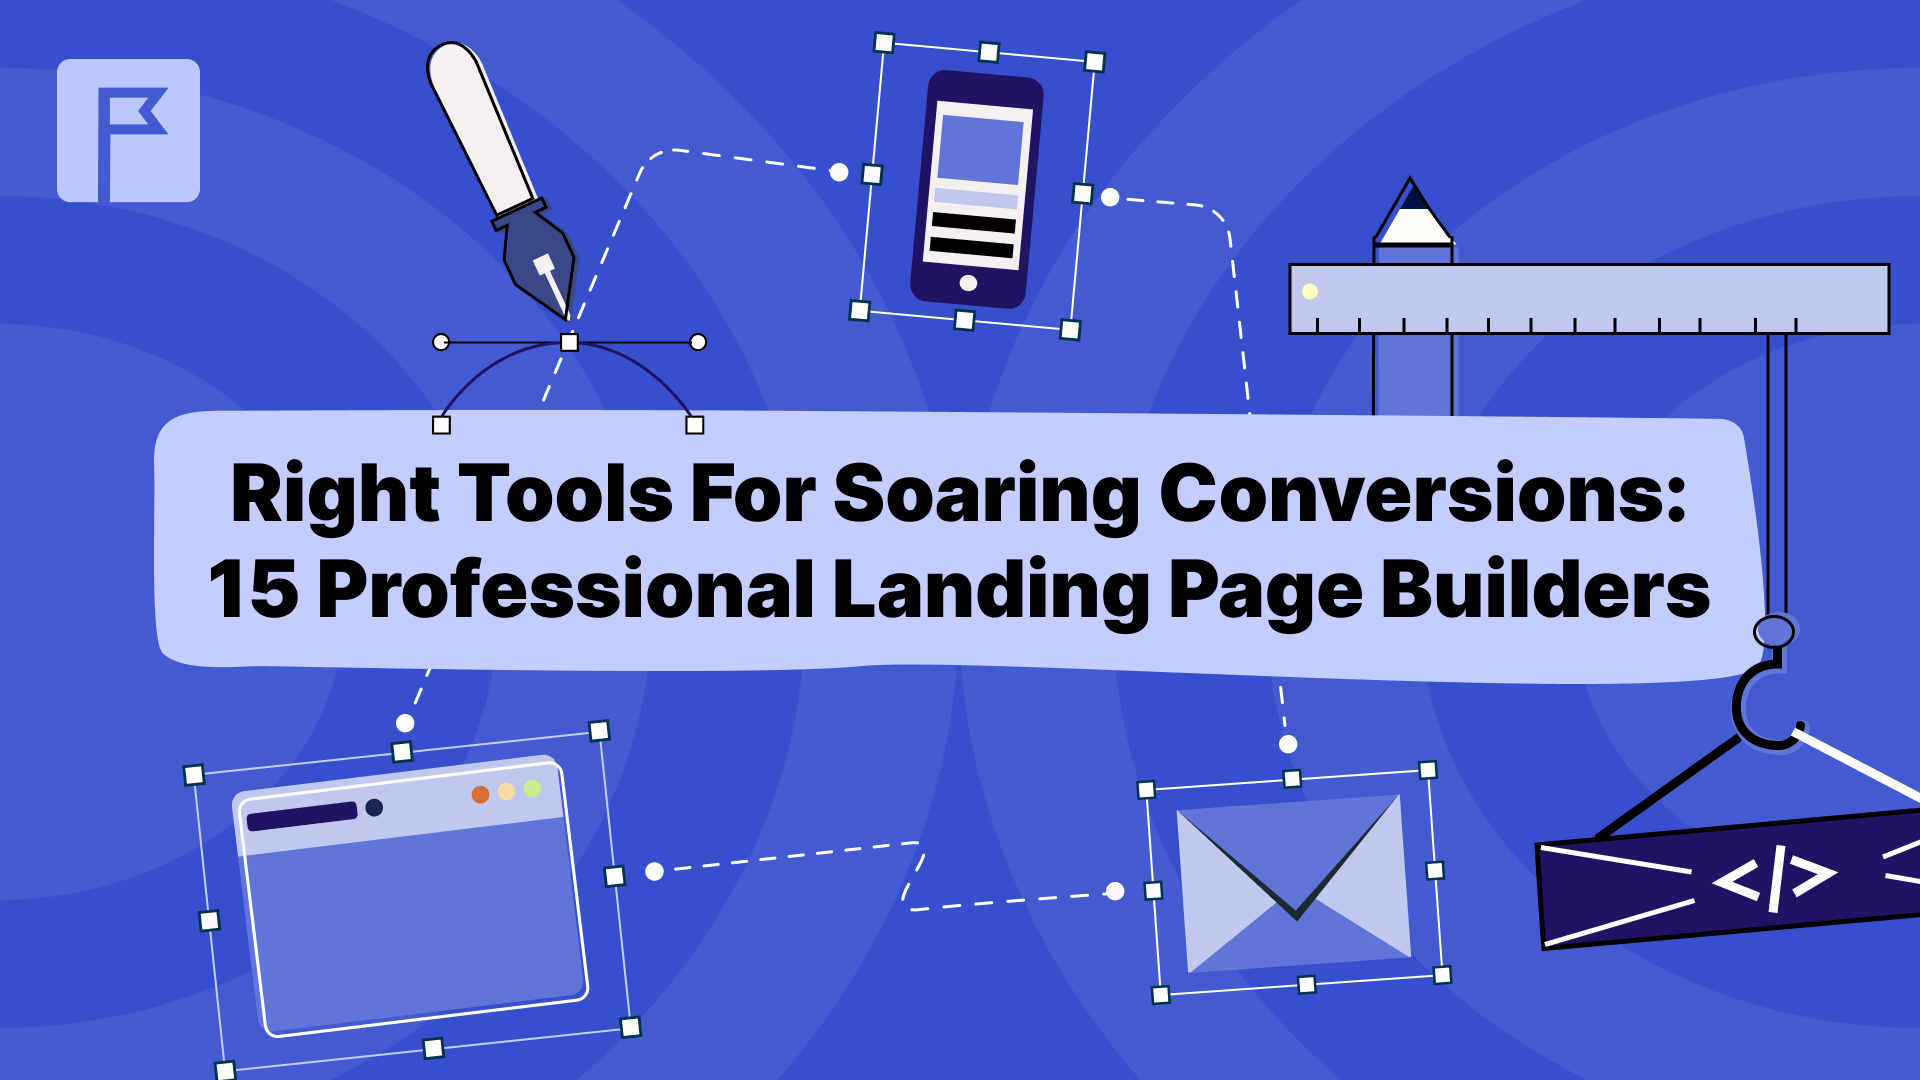 Right Tools For Soaring Conversions: 15 Professional Landing Page Builders